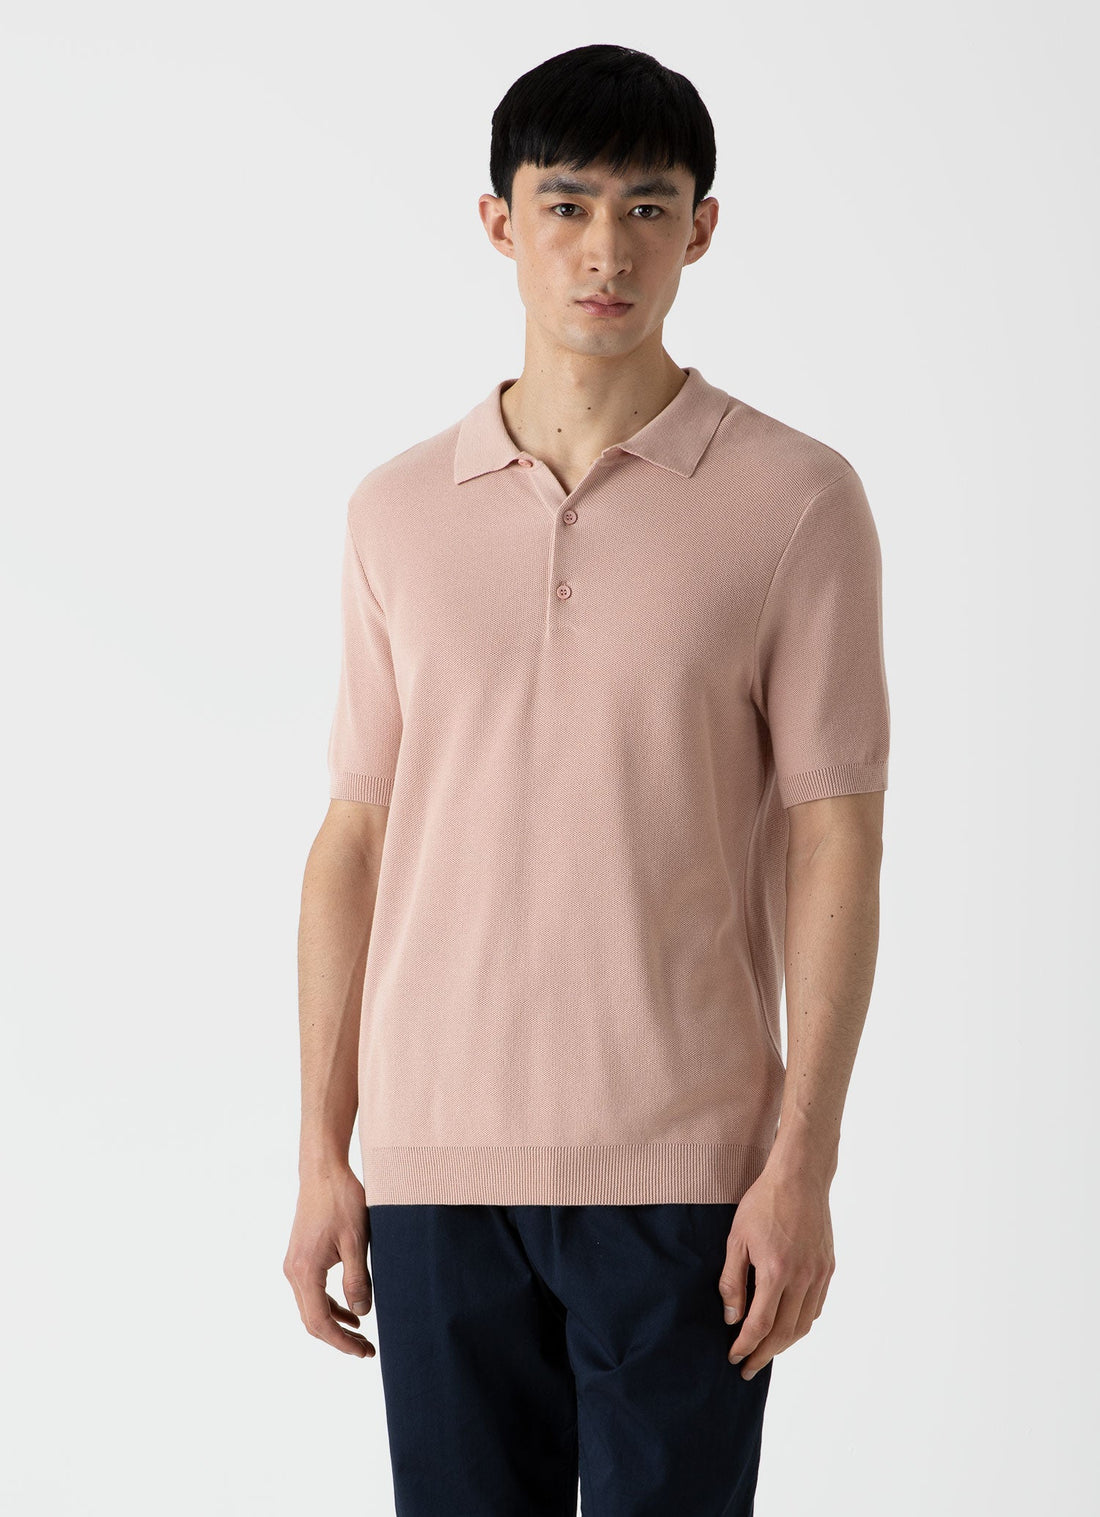 Men's Knit Polo Shirt in Shell Pink